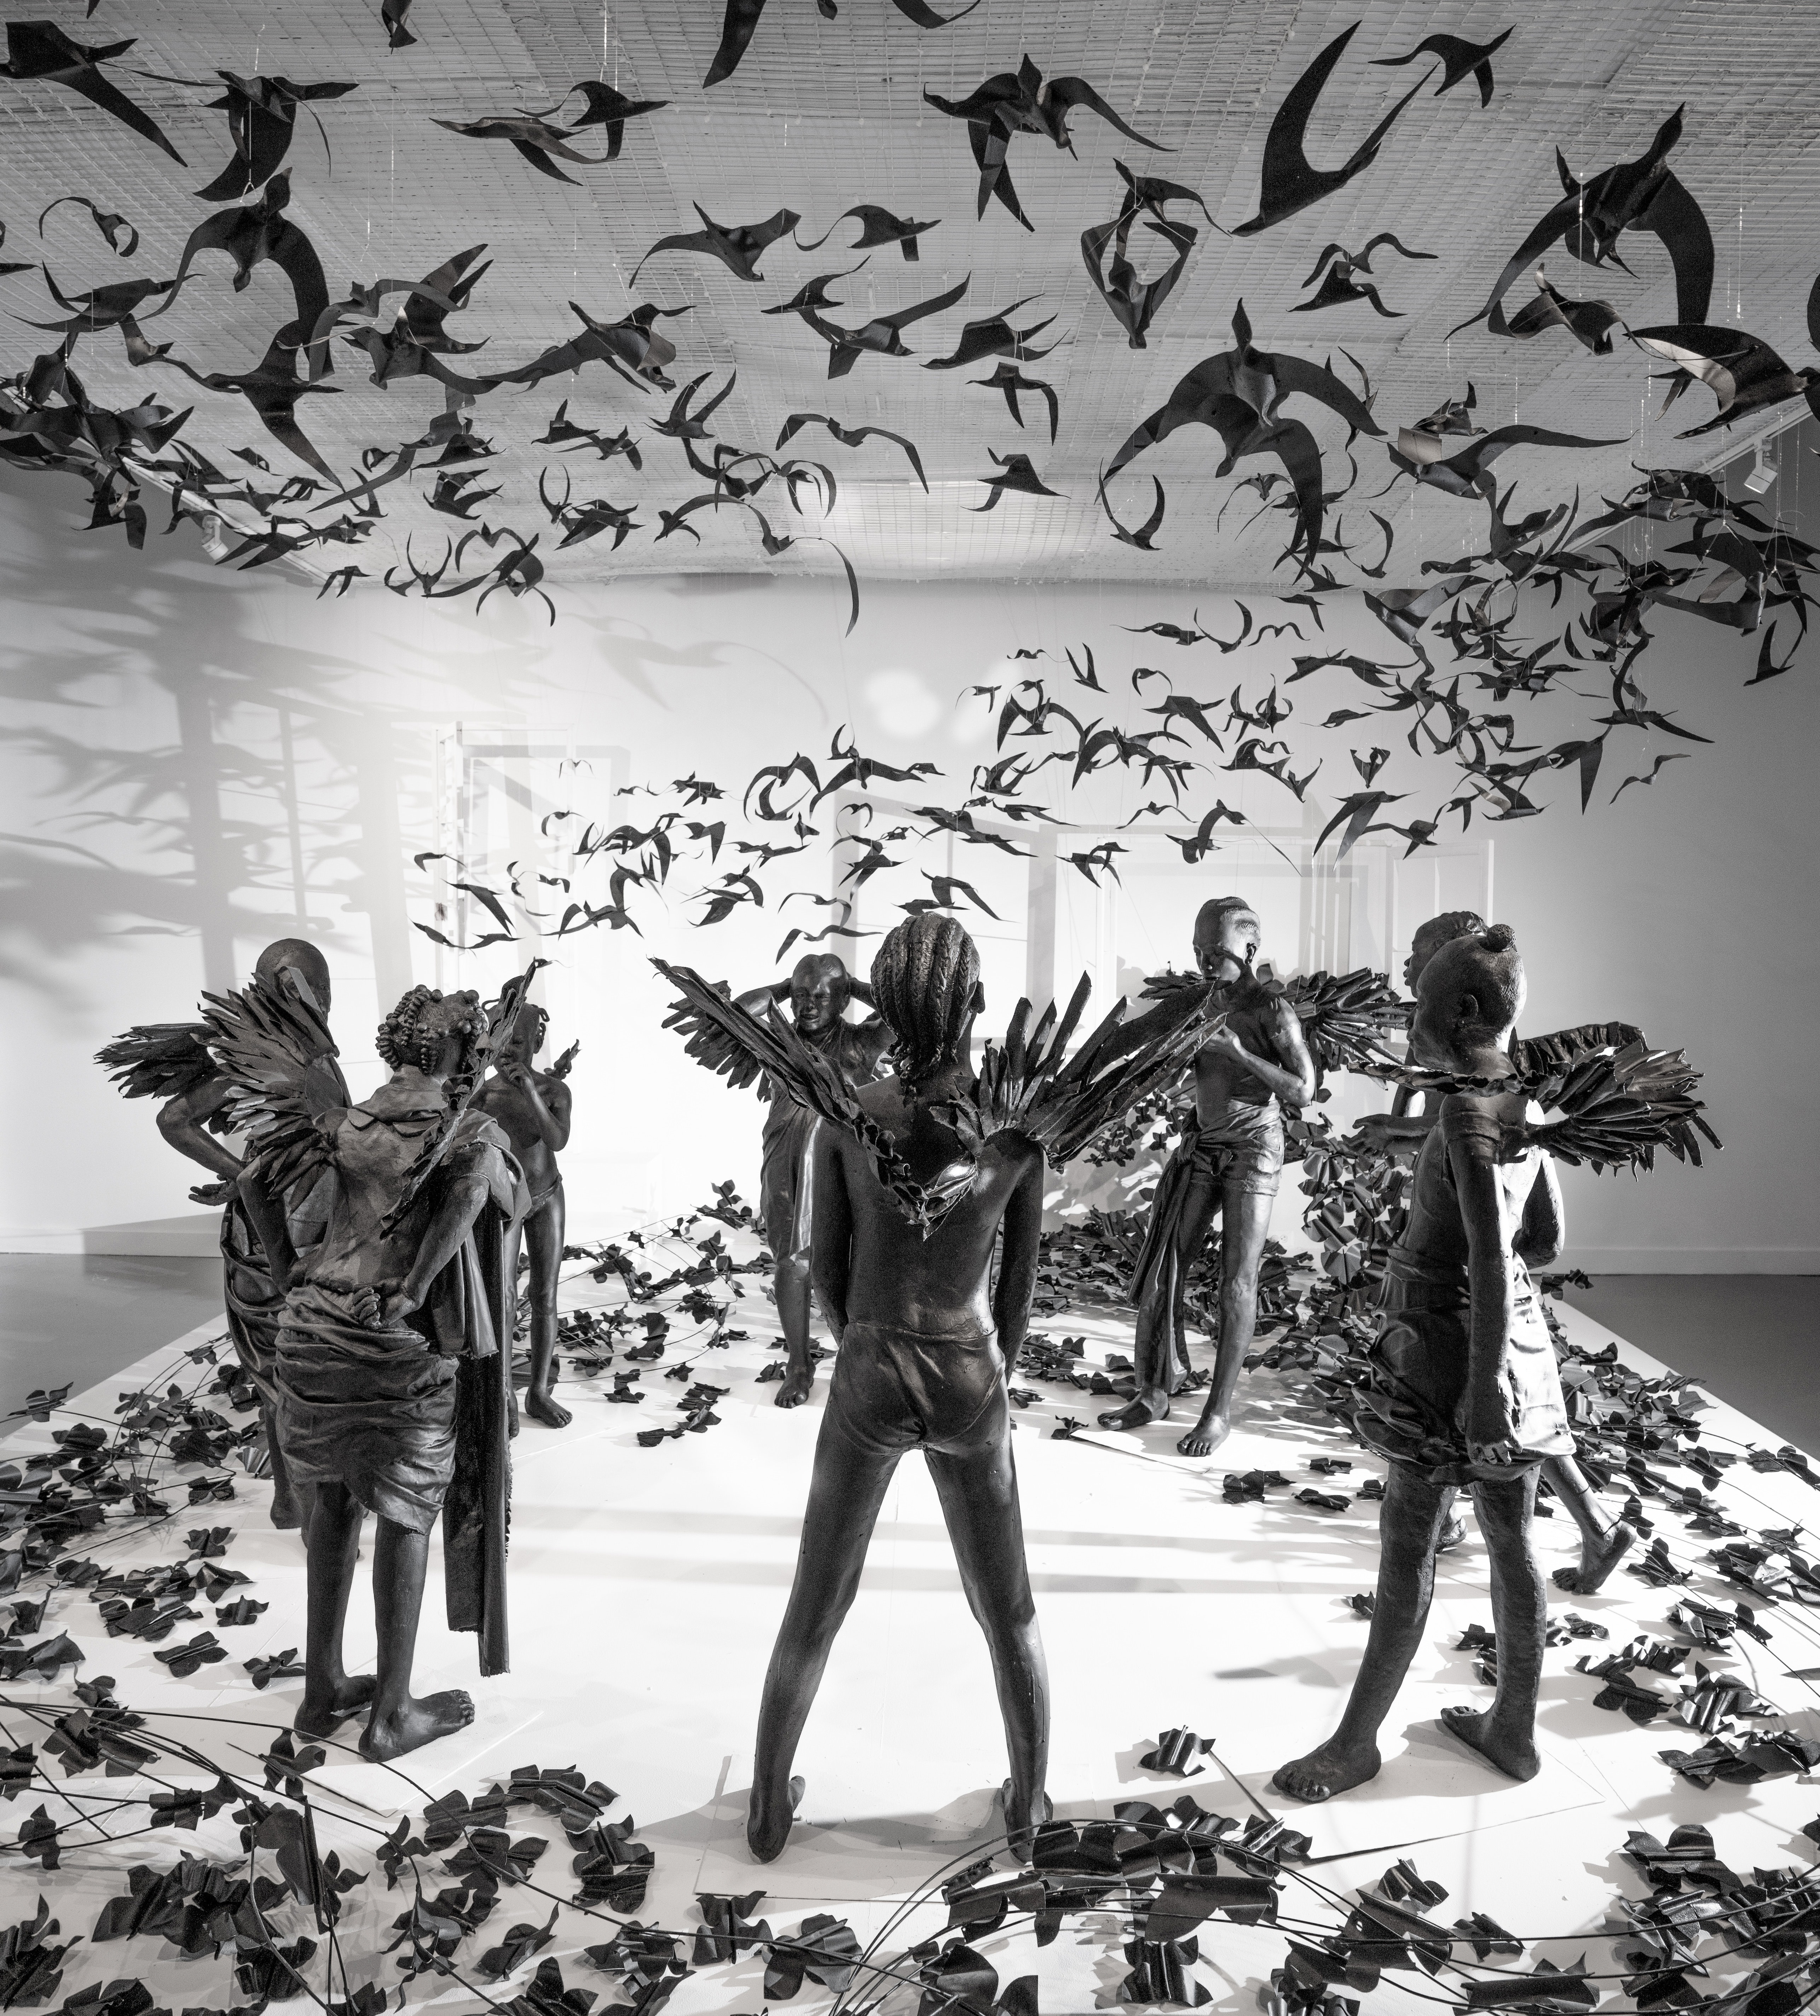 black sculptures with wings are surrounded by black bird sculptures